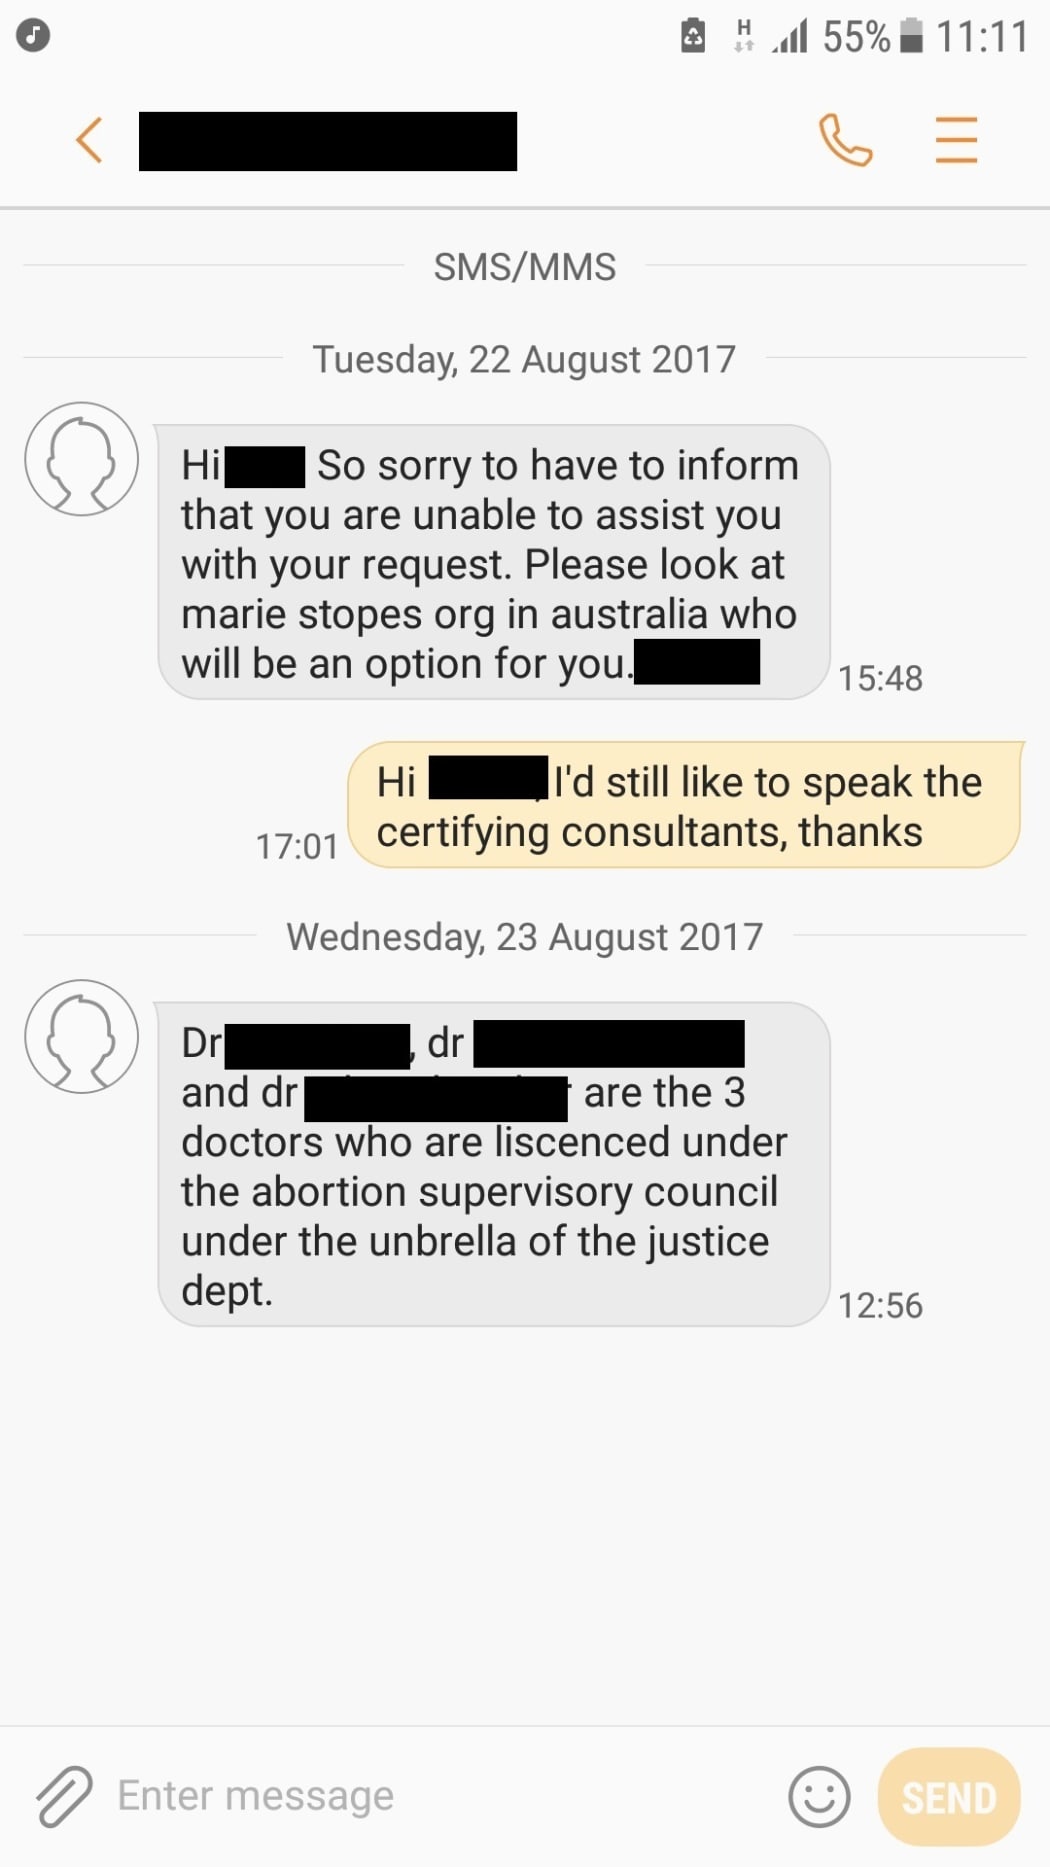 The text messages Kate received from a Waitematā DHB social worker.